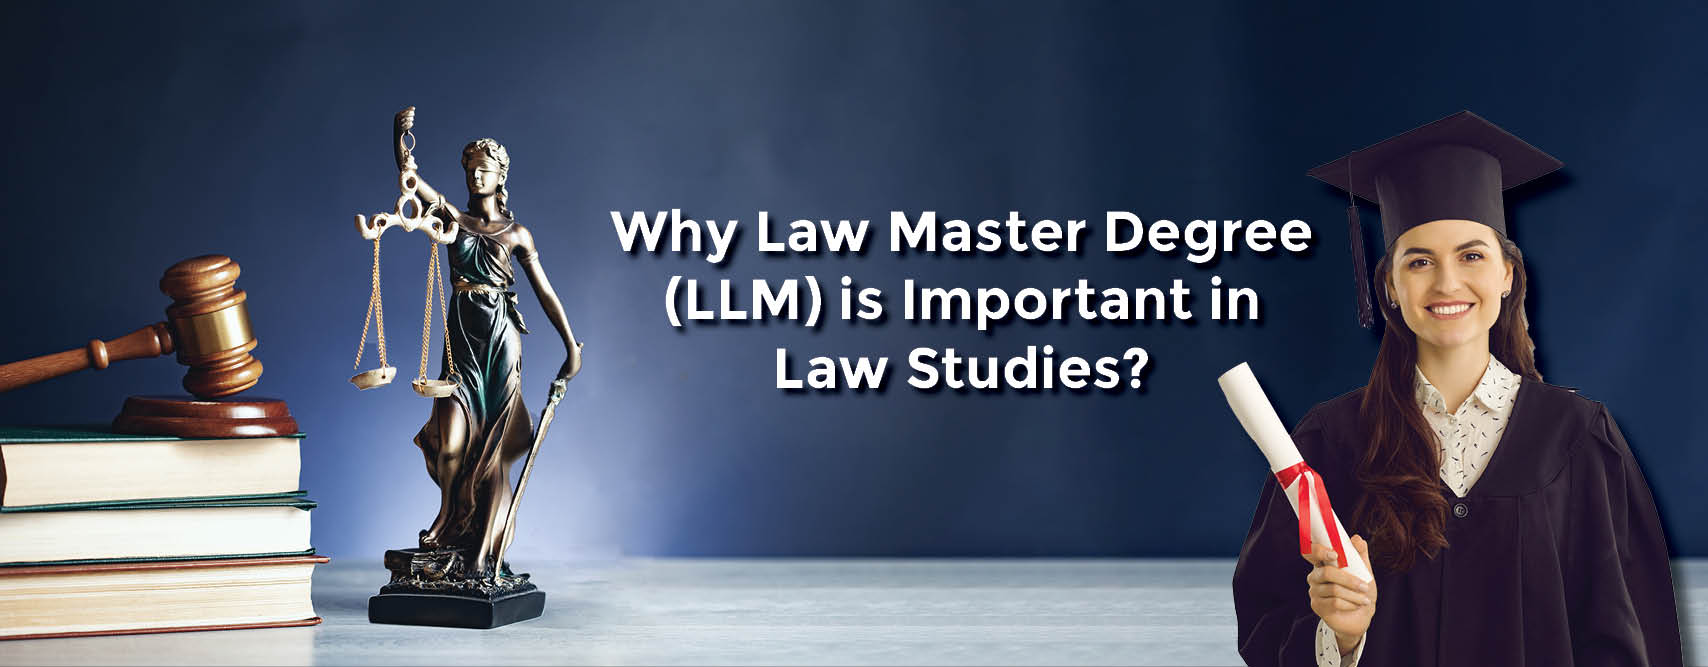 Why Law Master Degree (LLM) is Important in Law Studies?